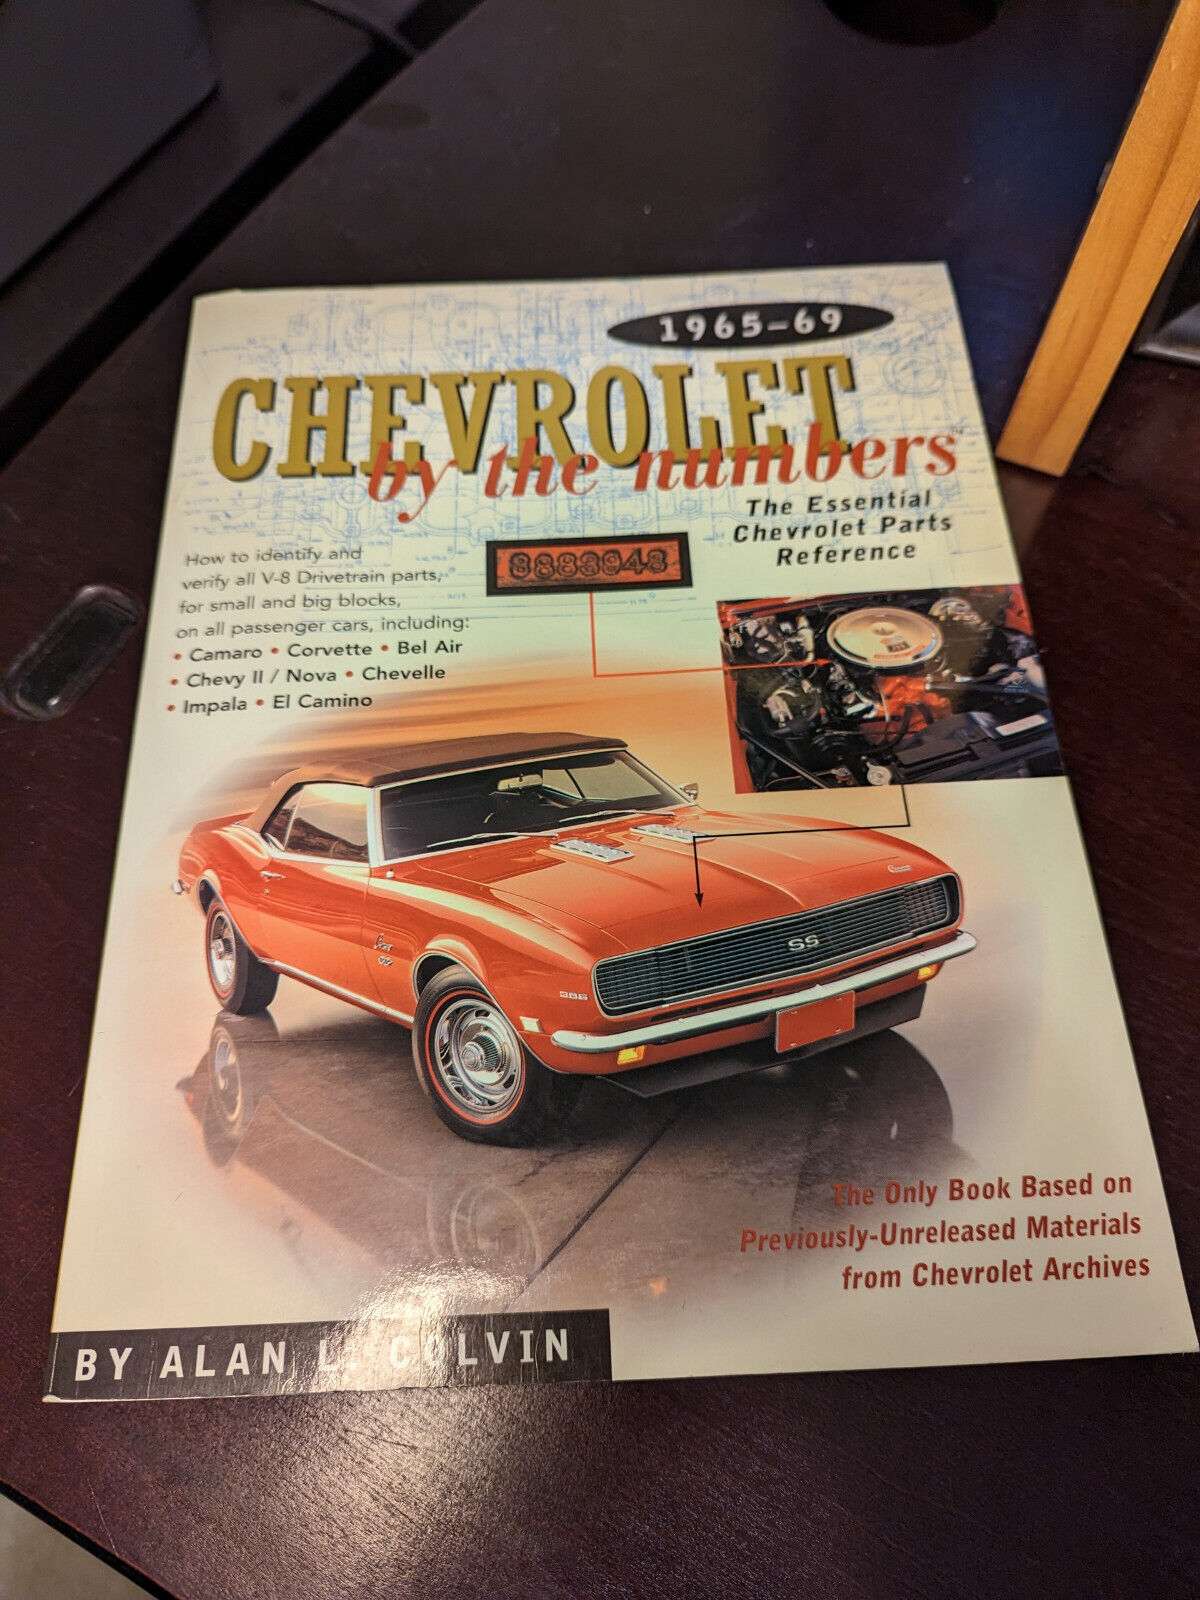 Chevrolet by the Numbers 1965-69: Essential Parts Reference book by Alan Colvin